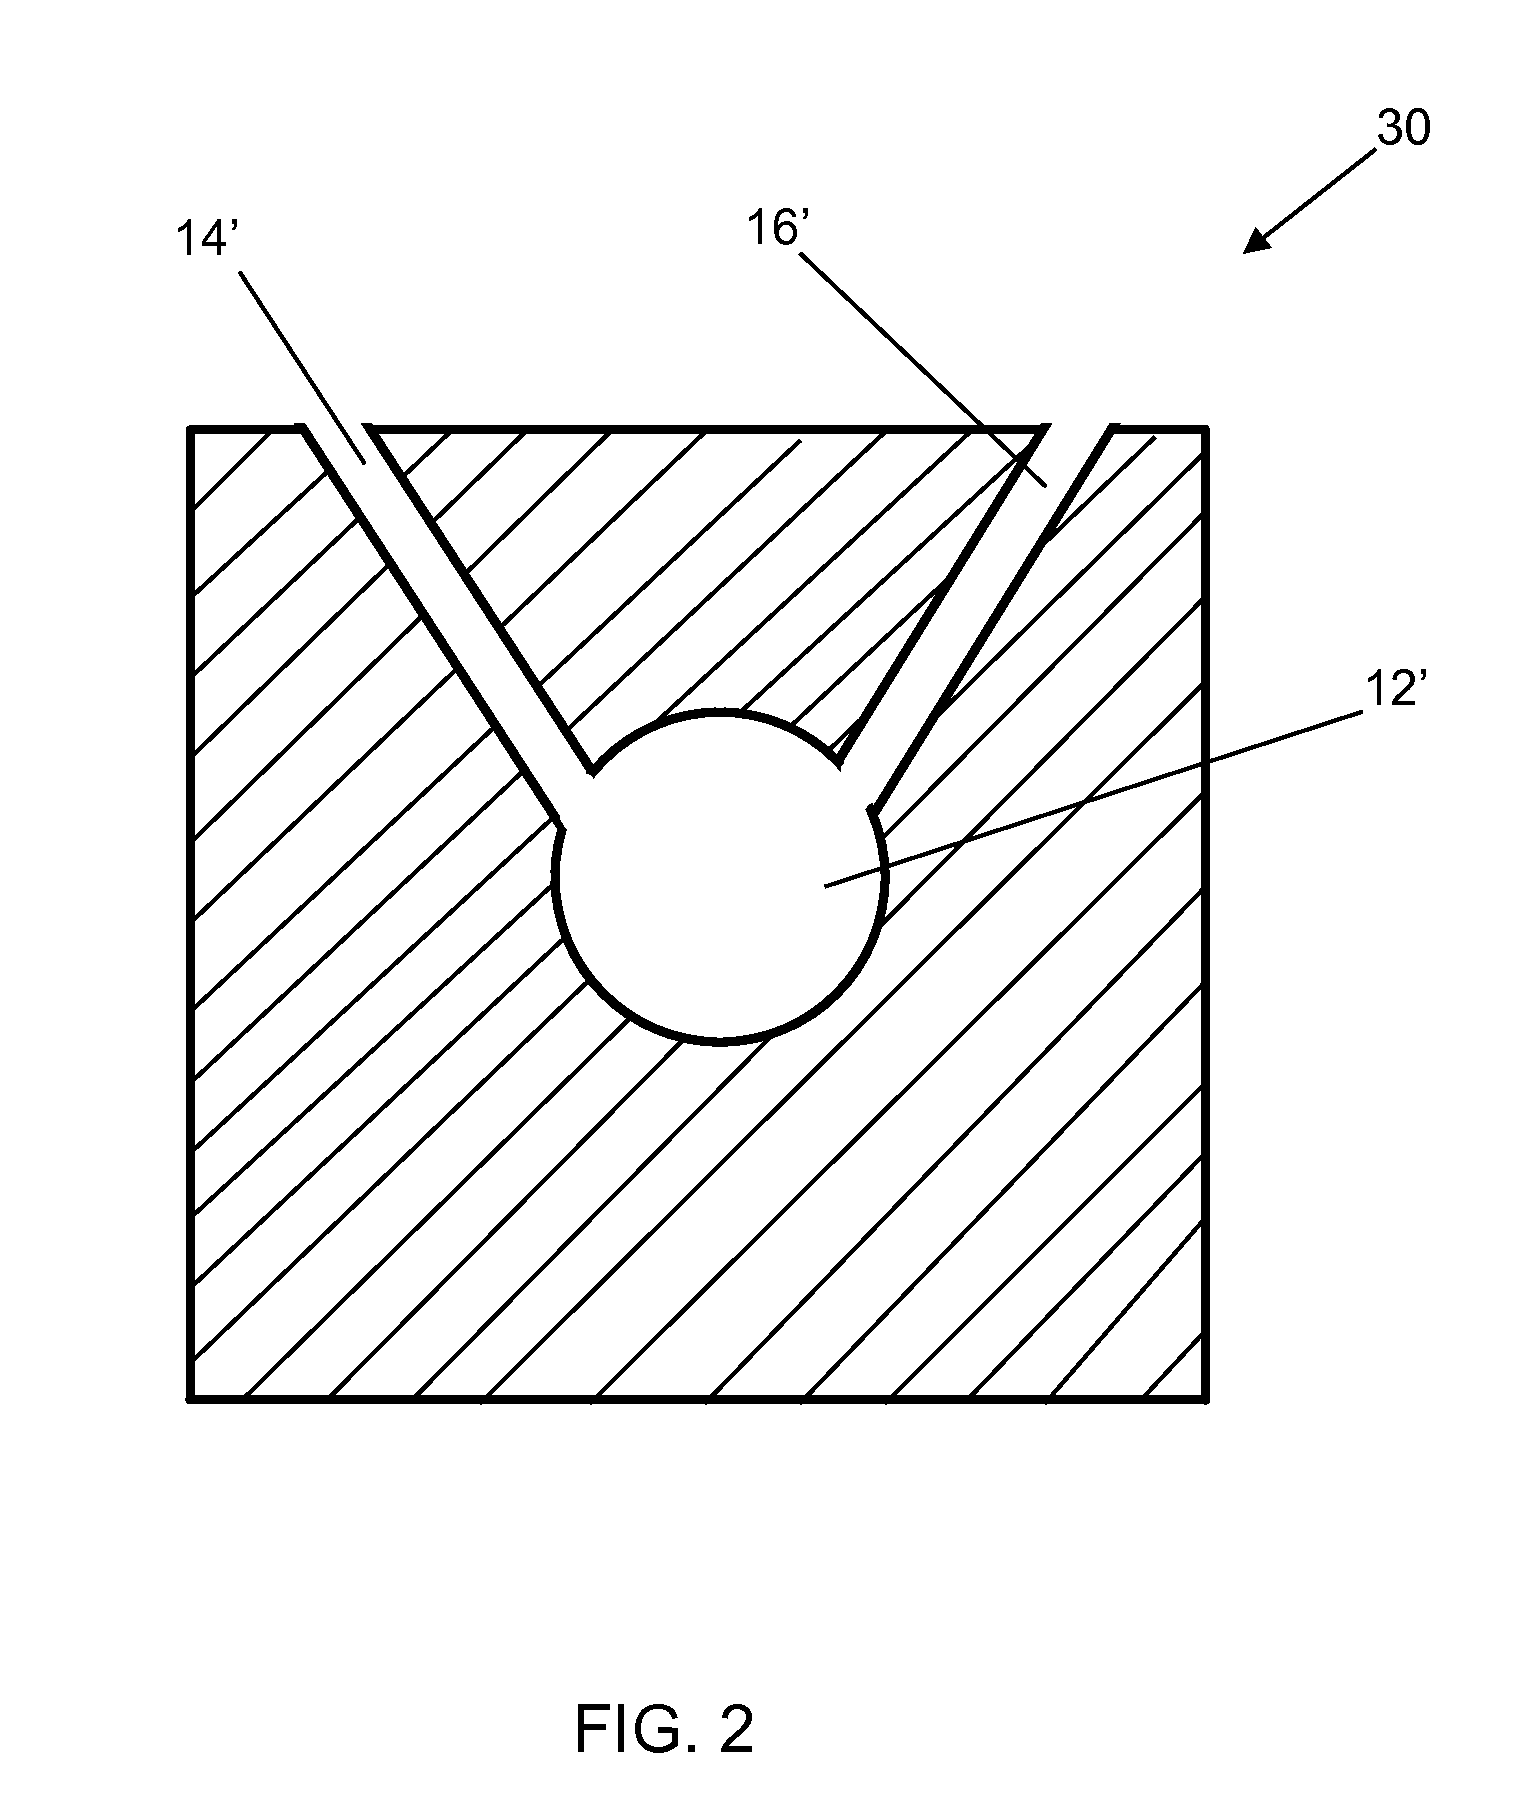 Process of debundling carbon fiber tow and molding compositions containing such fibers